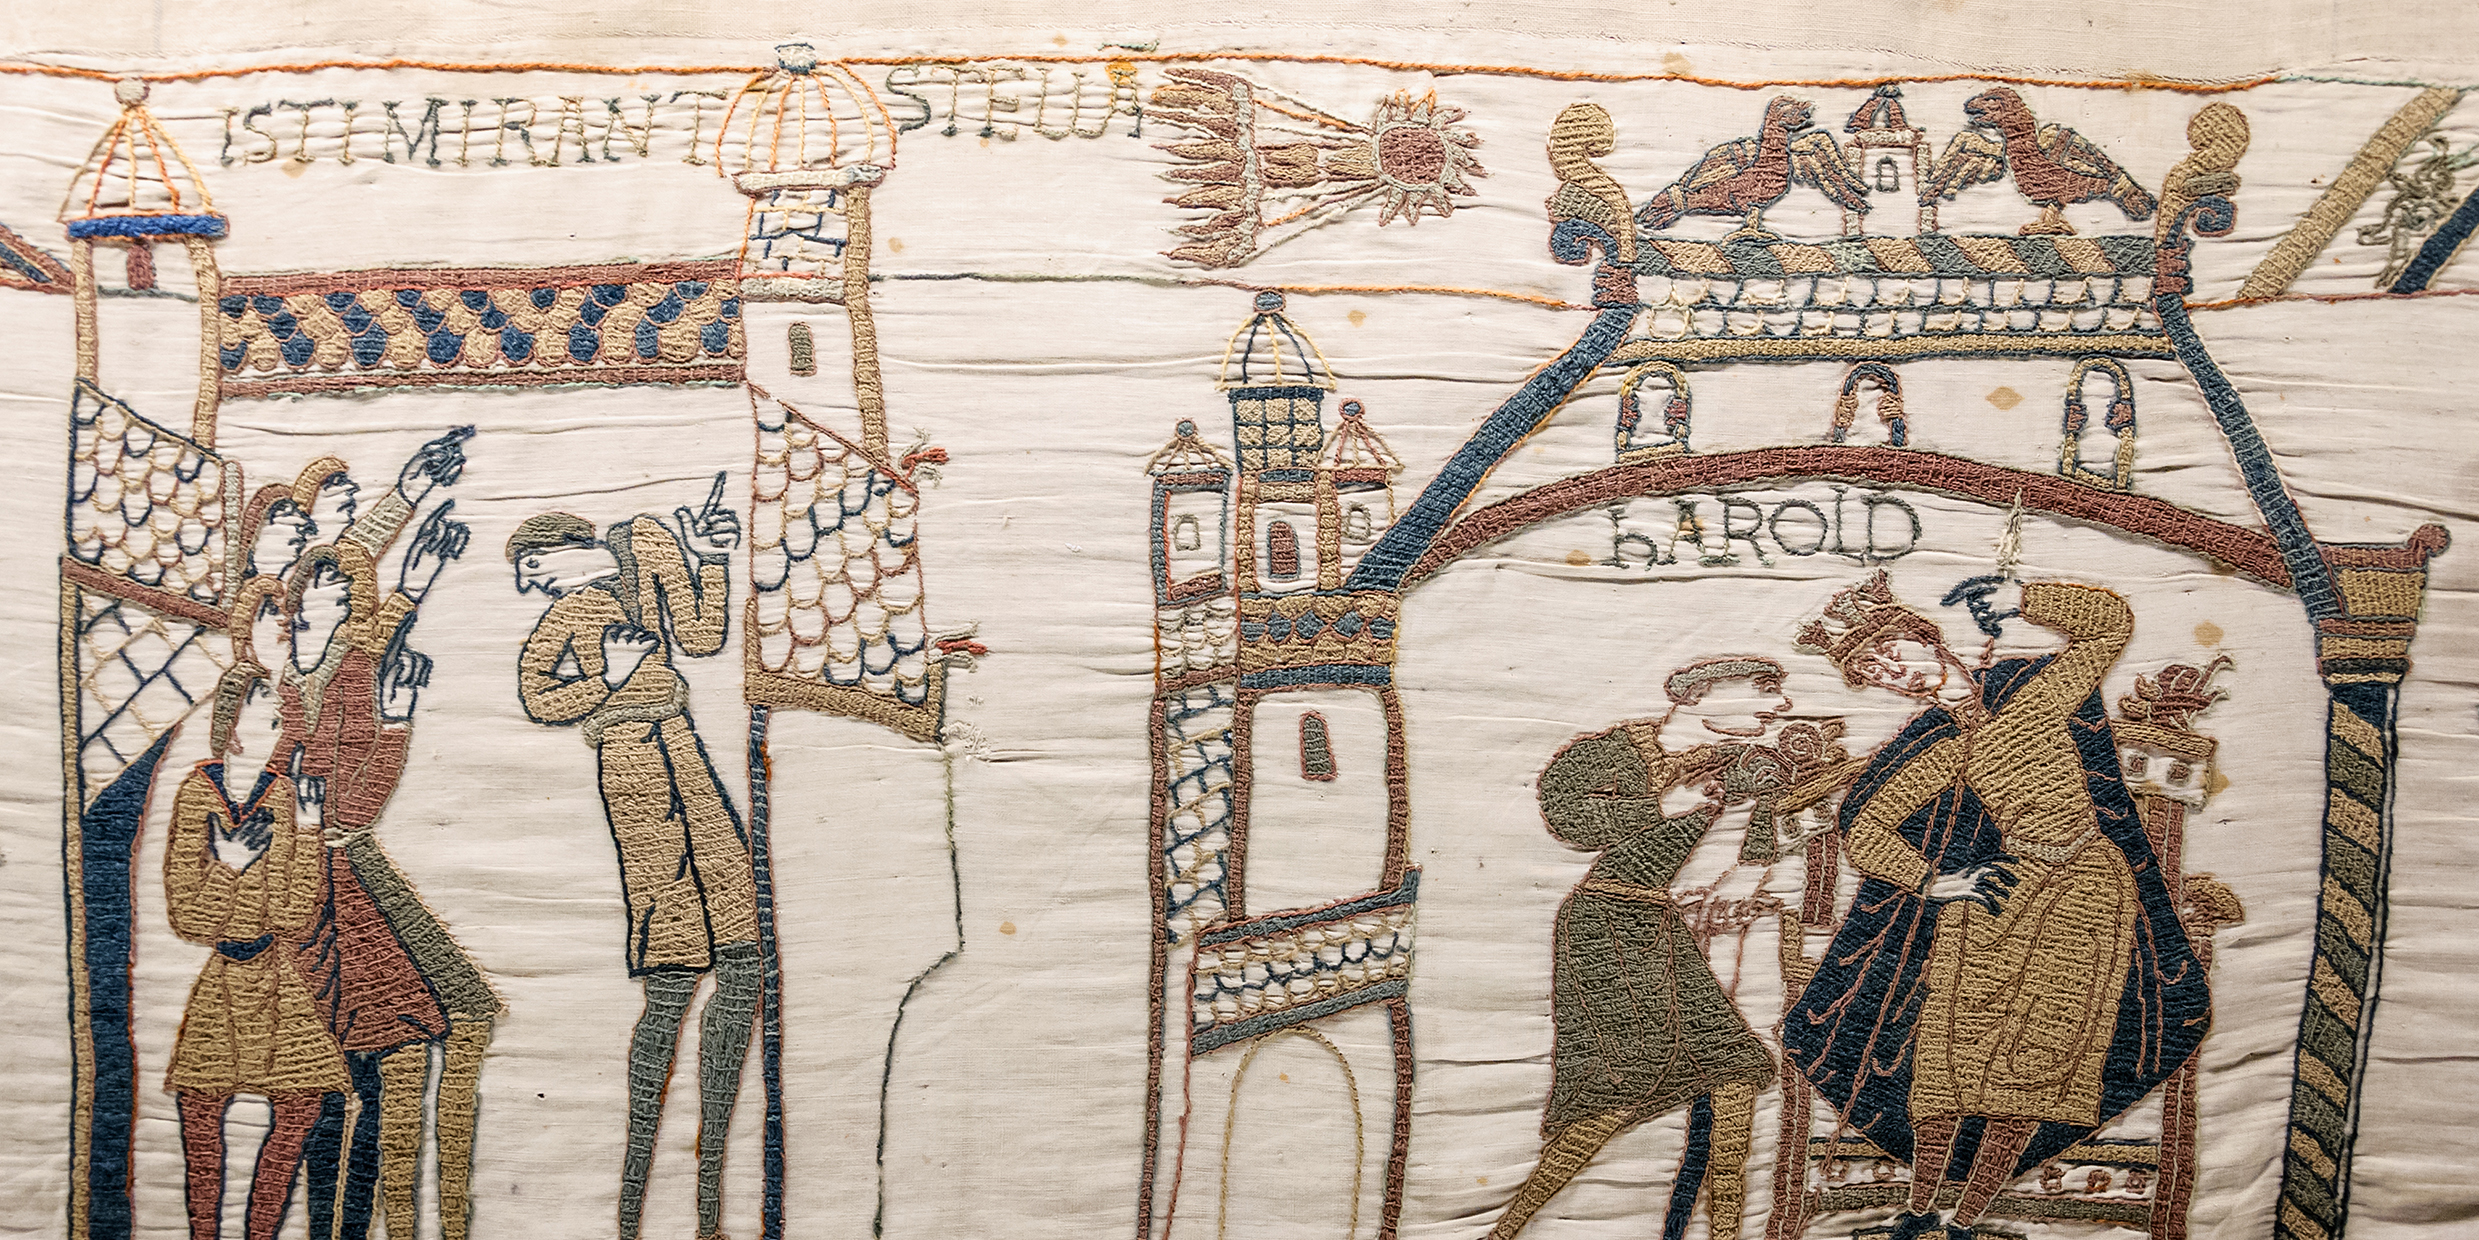 Image of the Bayeux Tapestry